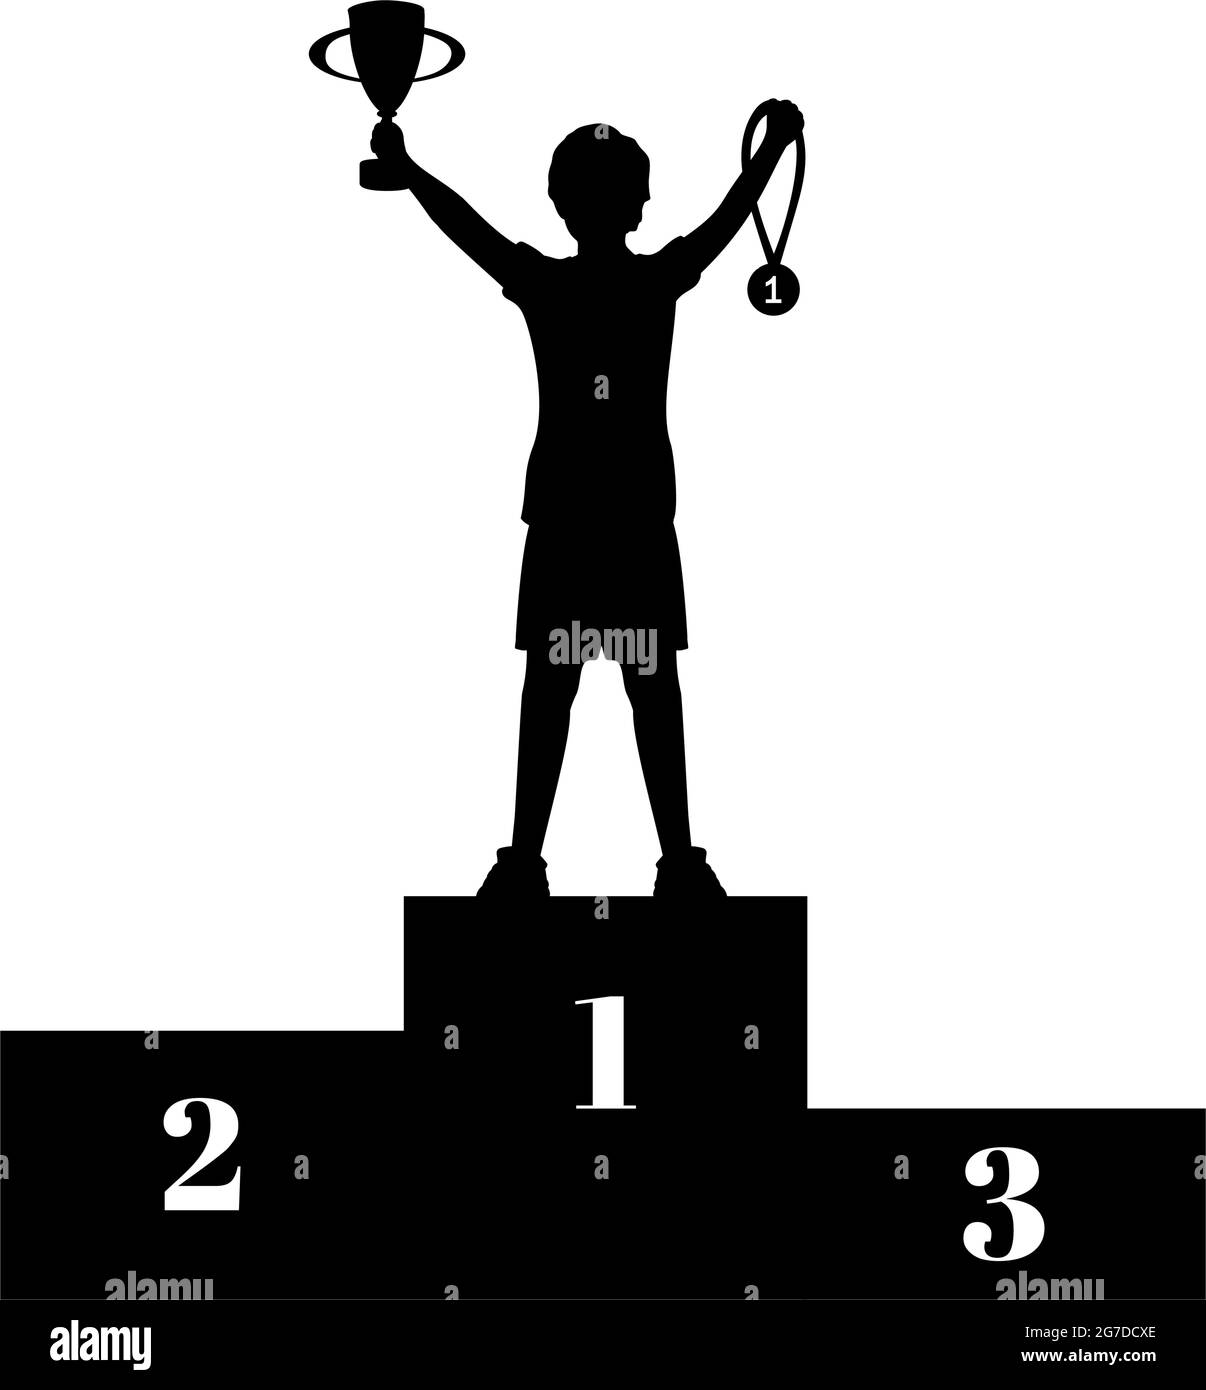 Silhouette boy winner of competition with cup and medal on the pedestal. Victory celebration. Symbol illustration icon logo Stock Vector